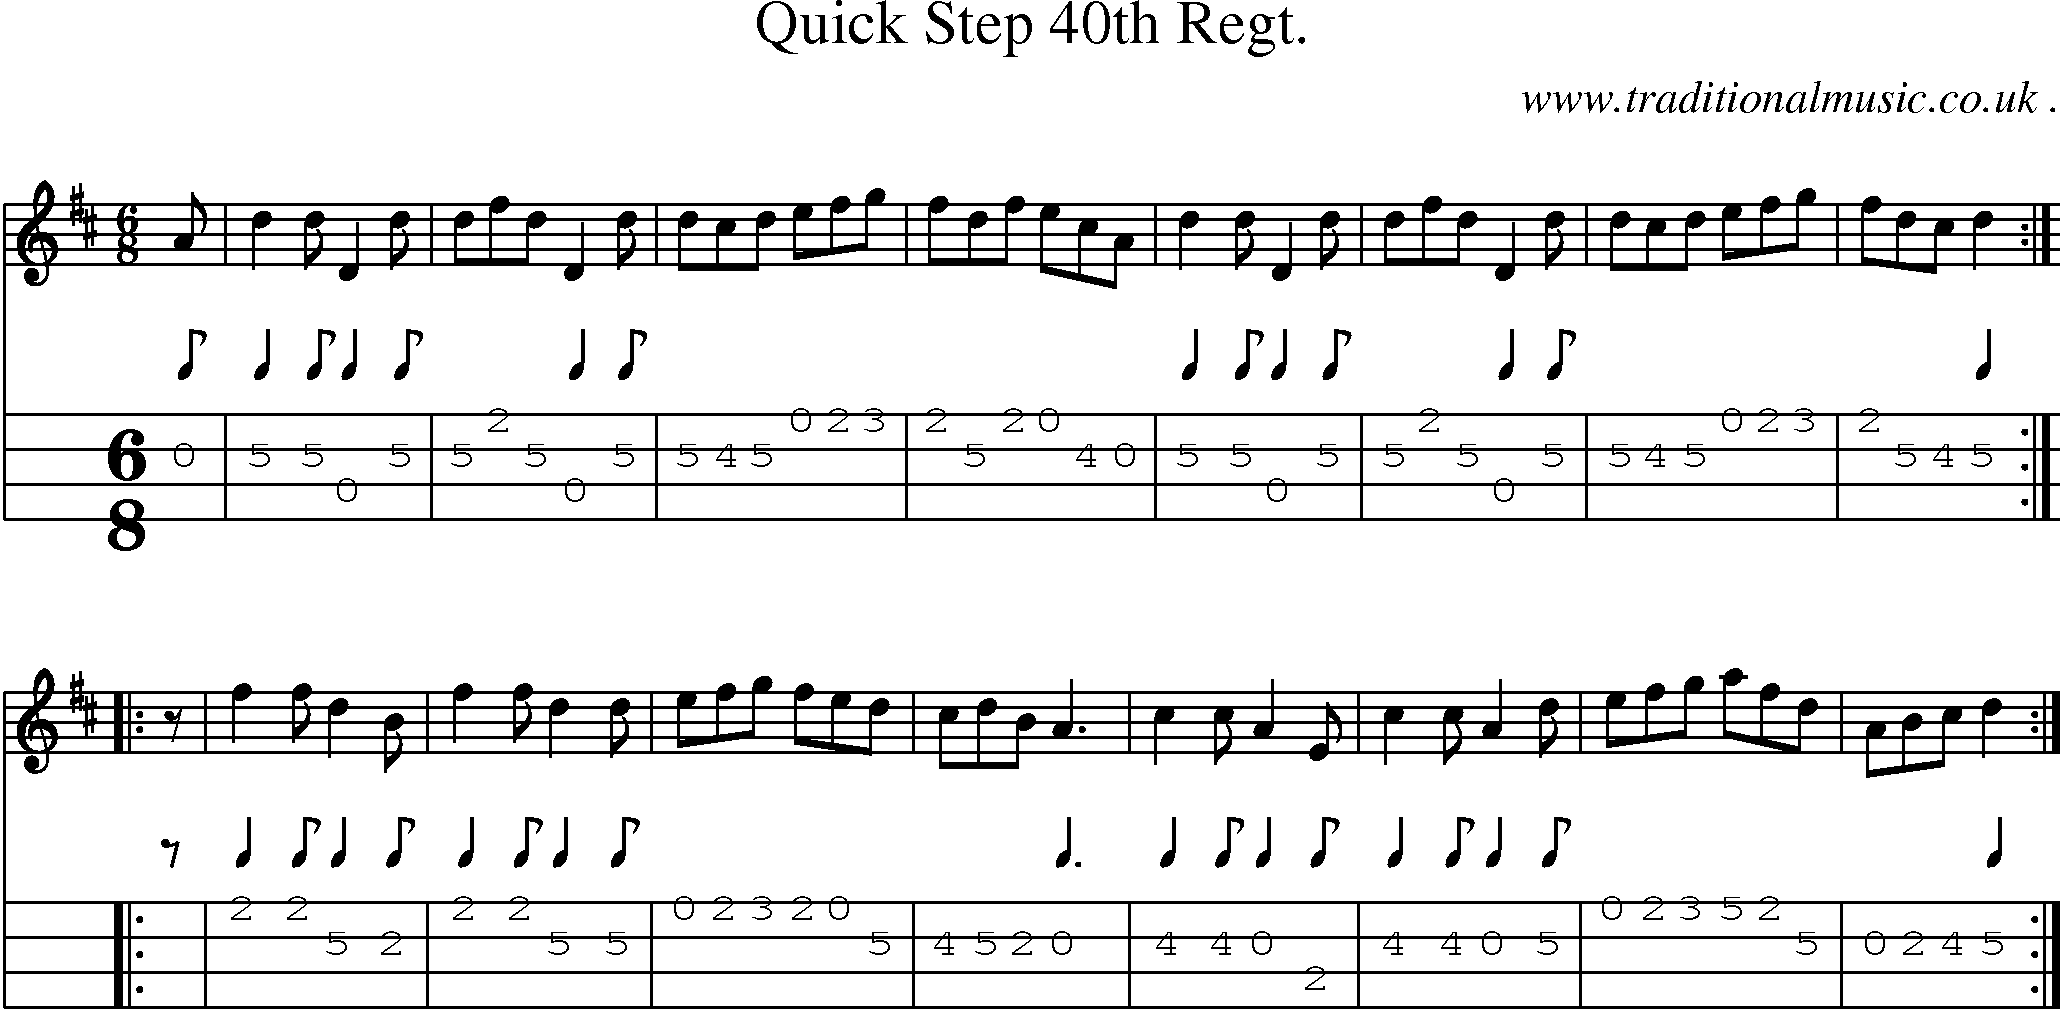 Sheet-Music and Mandolin Tabs for Quick Step 40th Regt